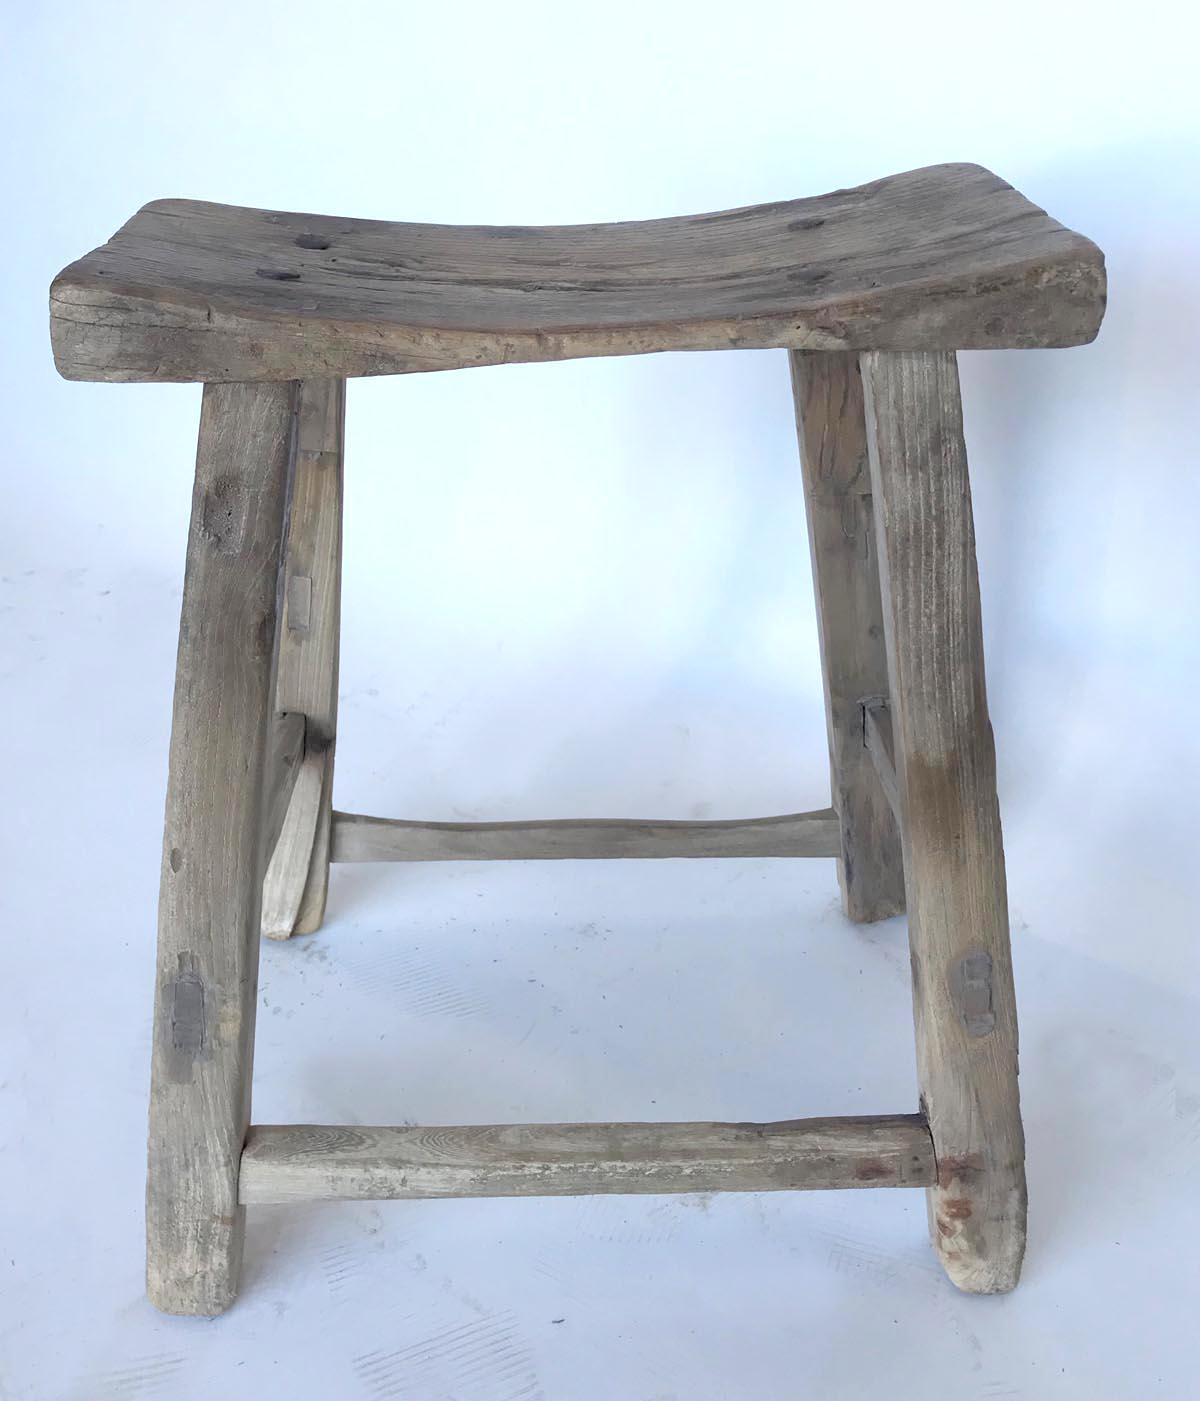 Old elm stool with mortise and tenon construction. Good smooth patina in grey tones.
Sturdy and functional as s side table too.